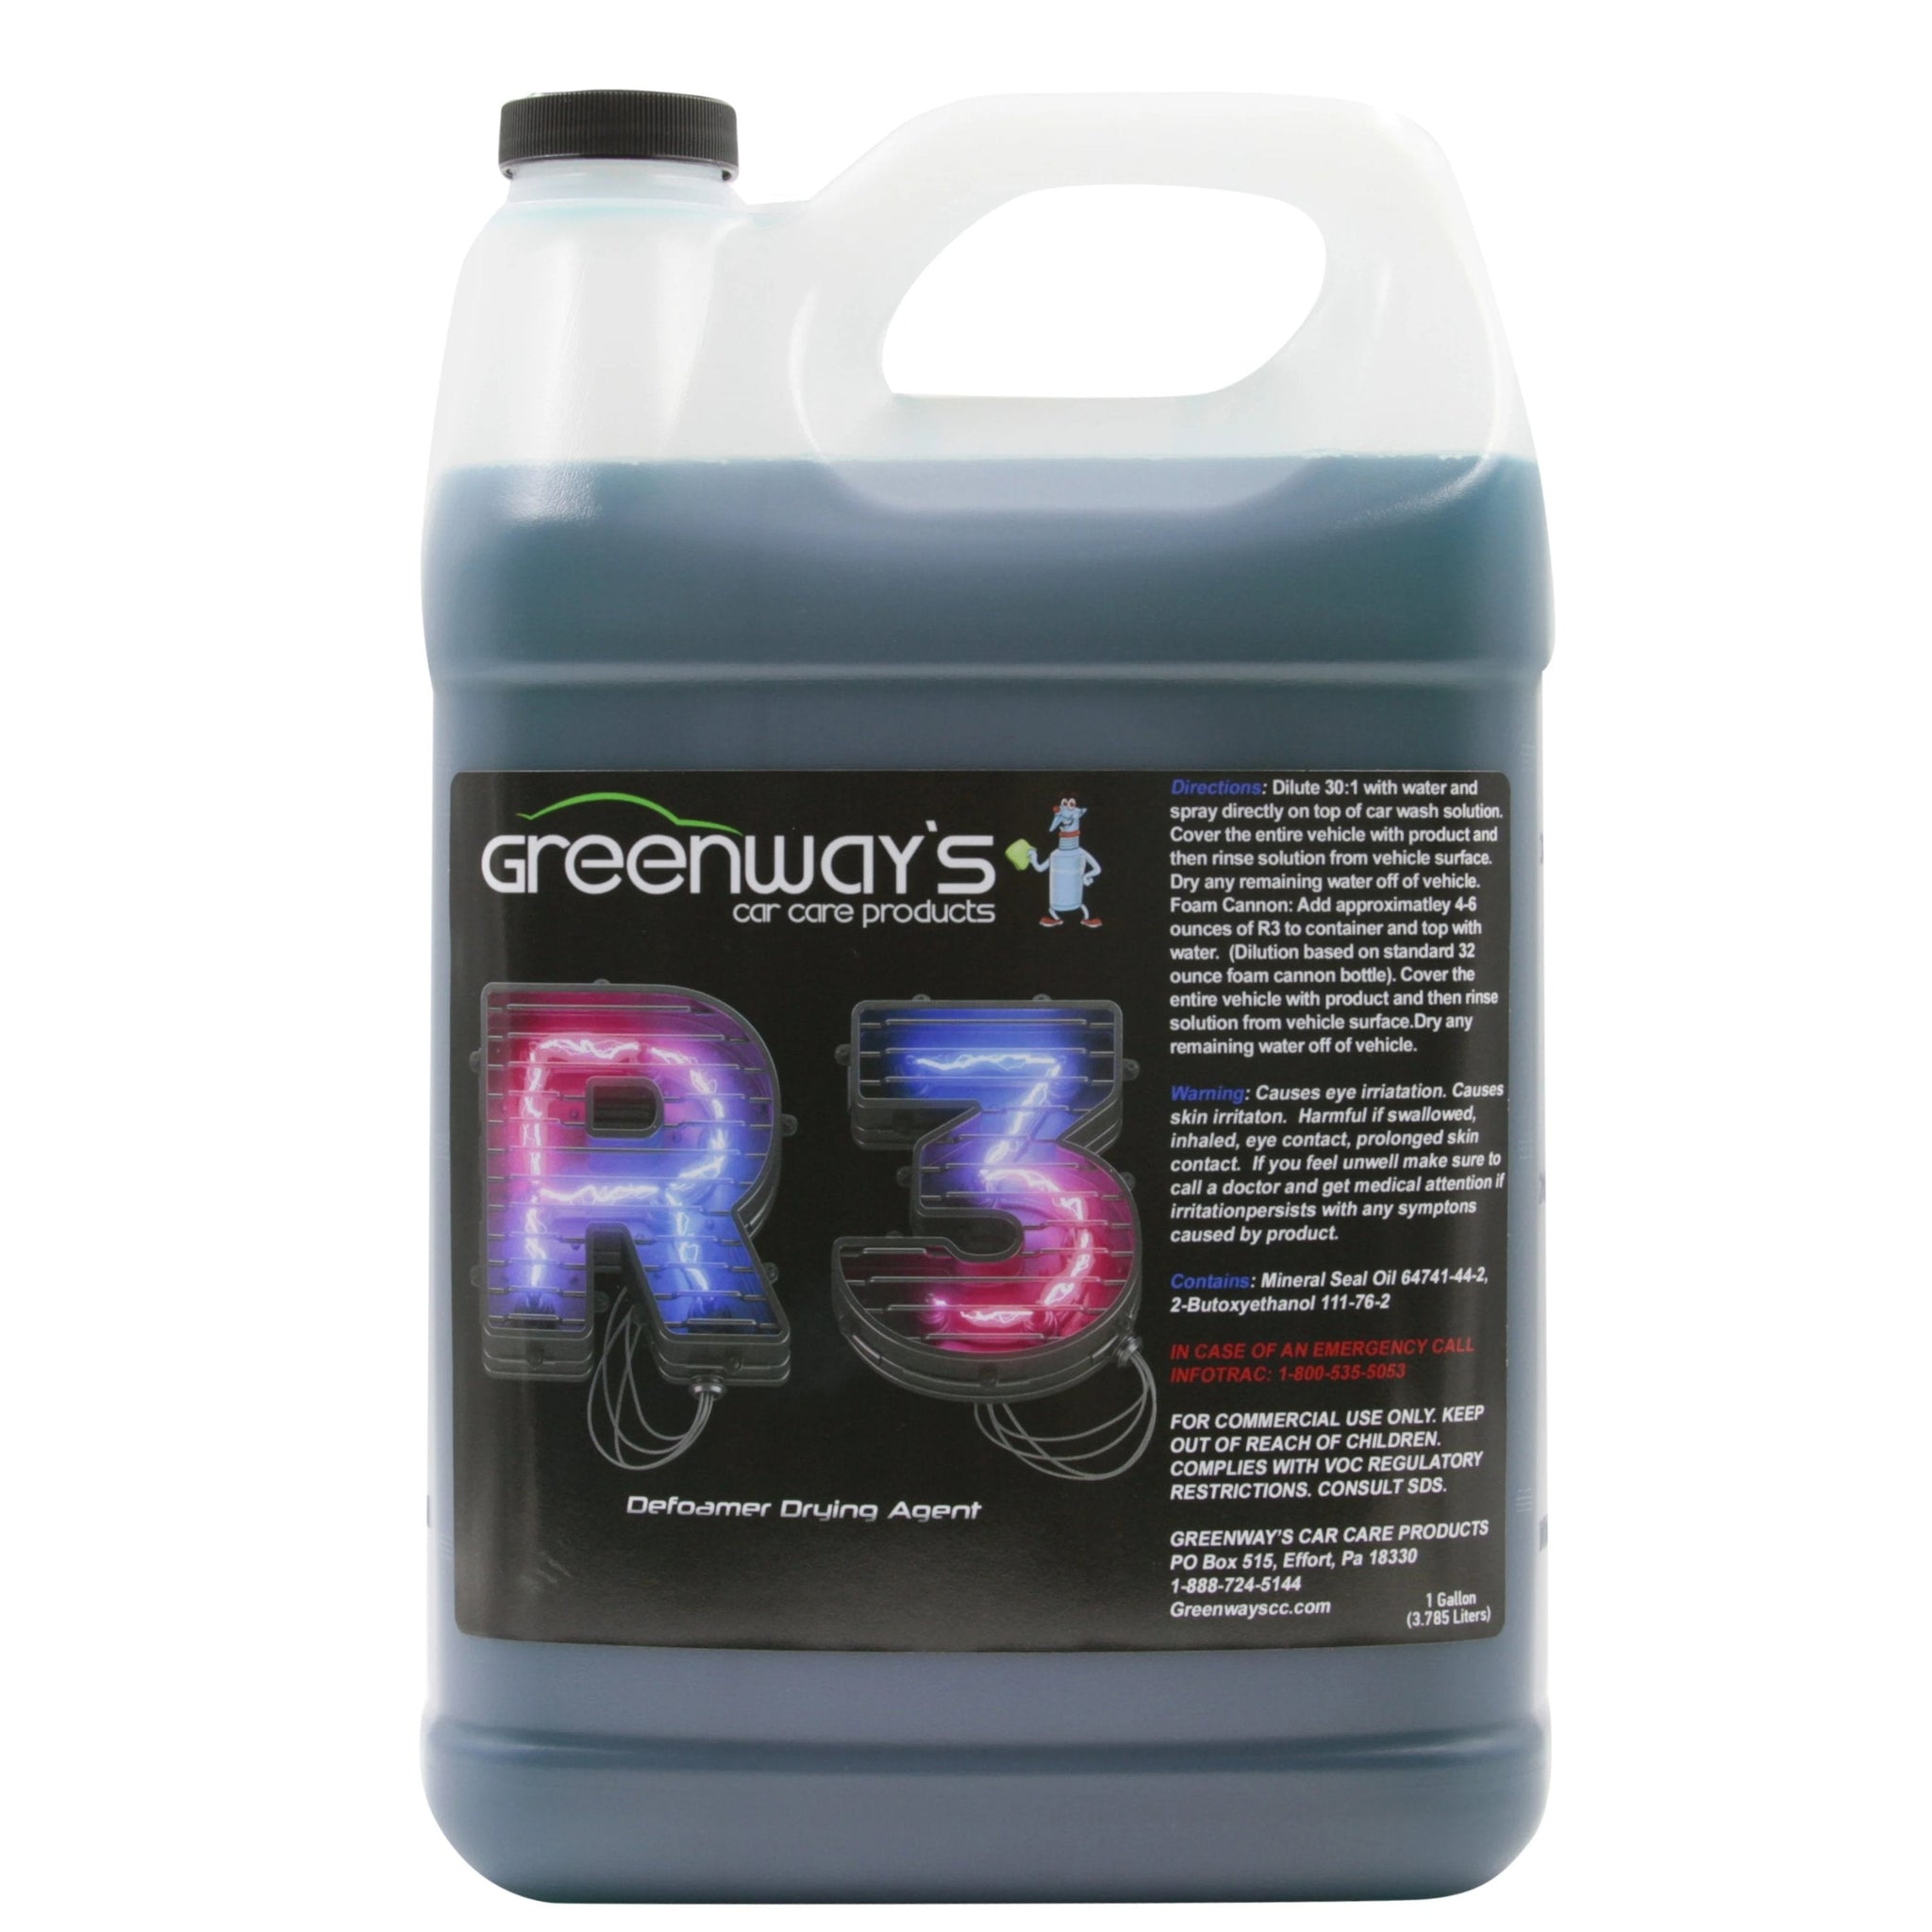 Greenway’s Car Care Products, R3, full-strength vehicle drying foam agent with optic brighteners, custom scented, 1 gallon.